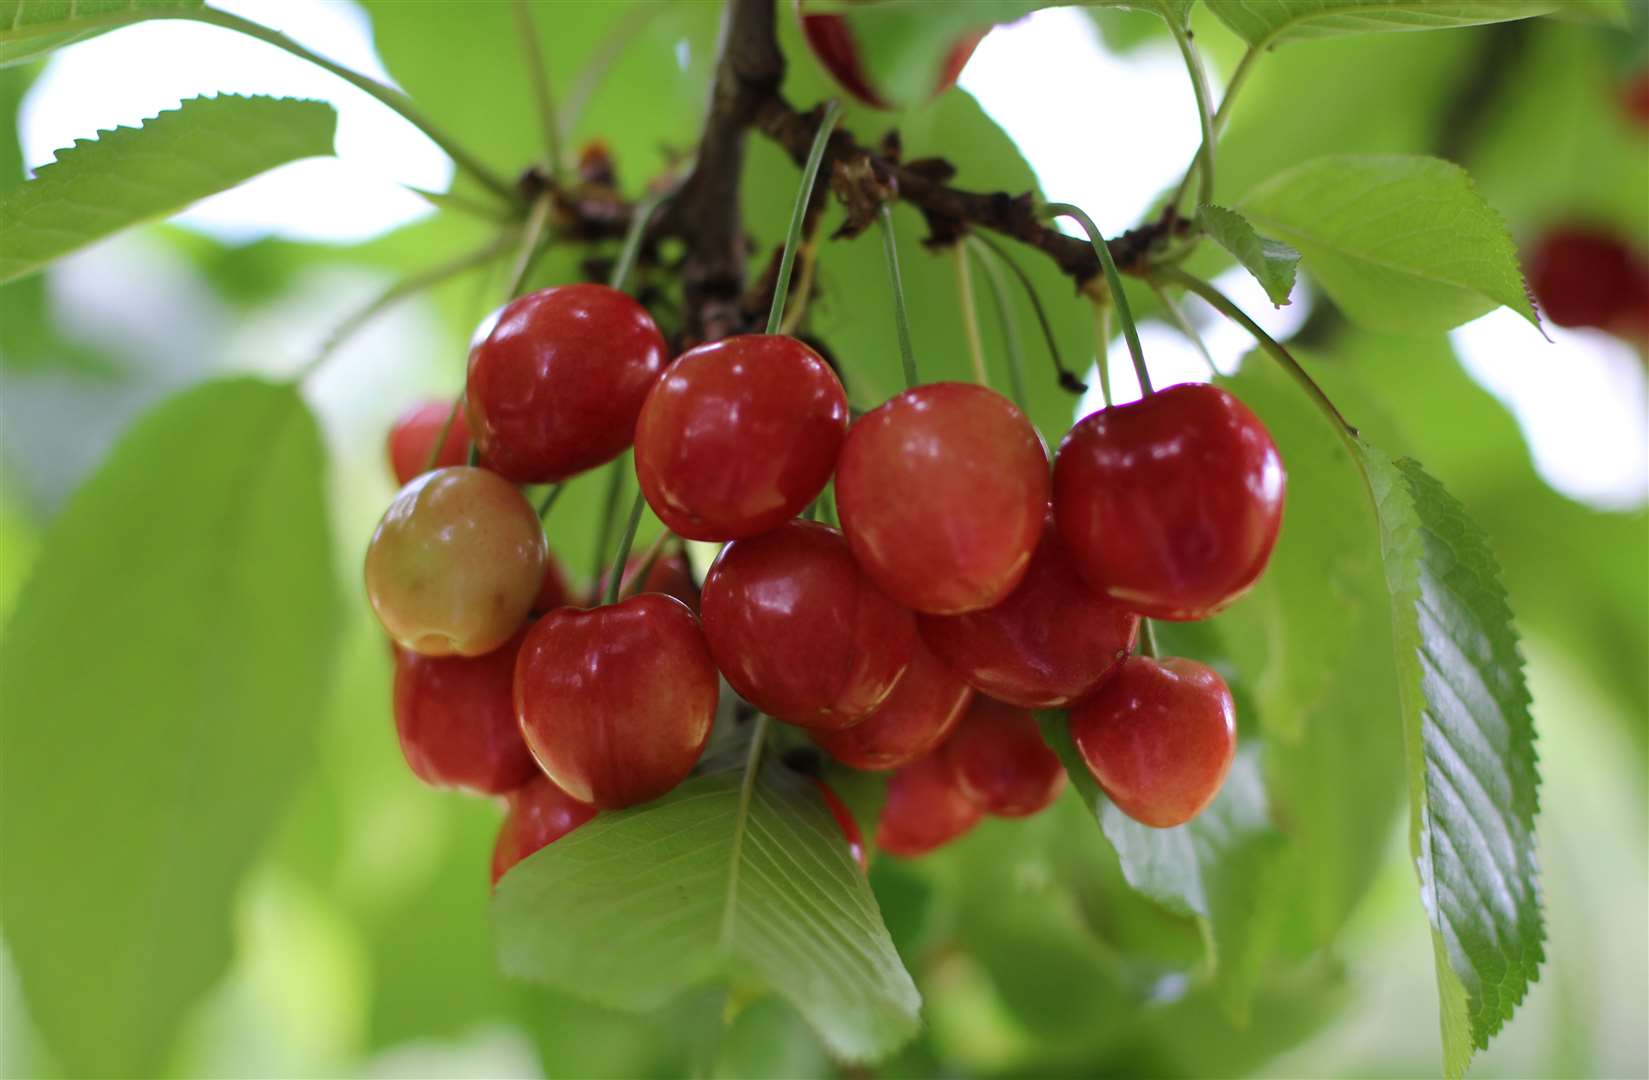 Brogdale Cherry Fair will feature some 300 varieties